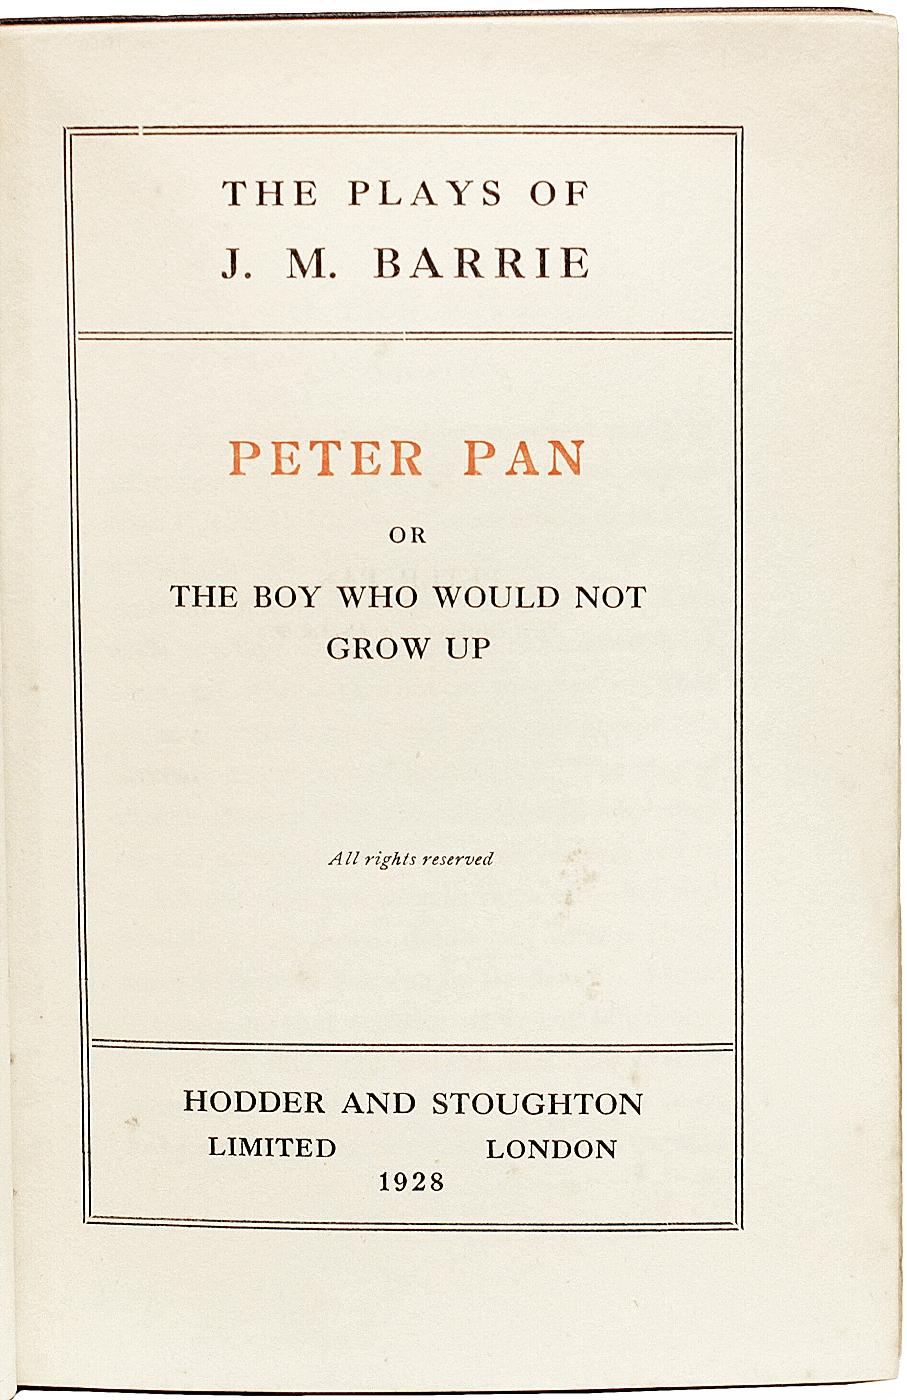 British J. M. BARRIE - Peter Pan - FIRST PLAY EDITION - AN IMPORTANT PRESENTATION COPY For Sale